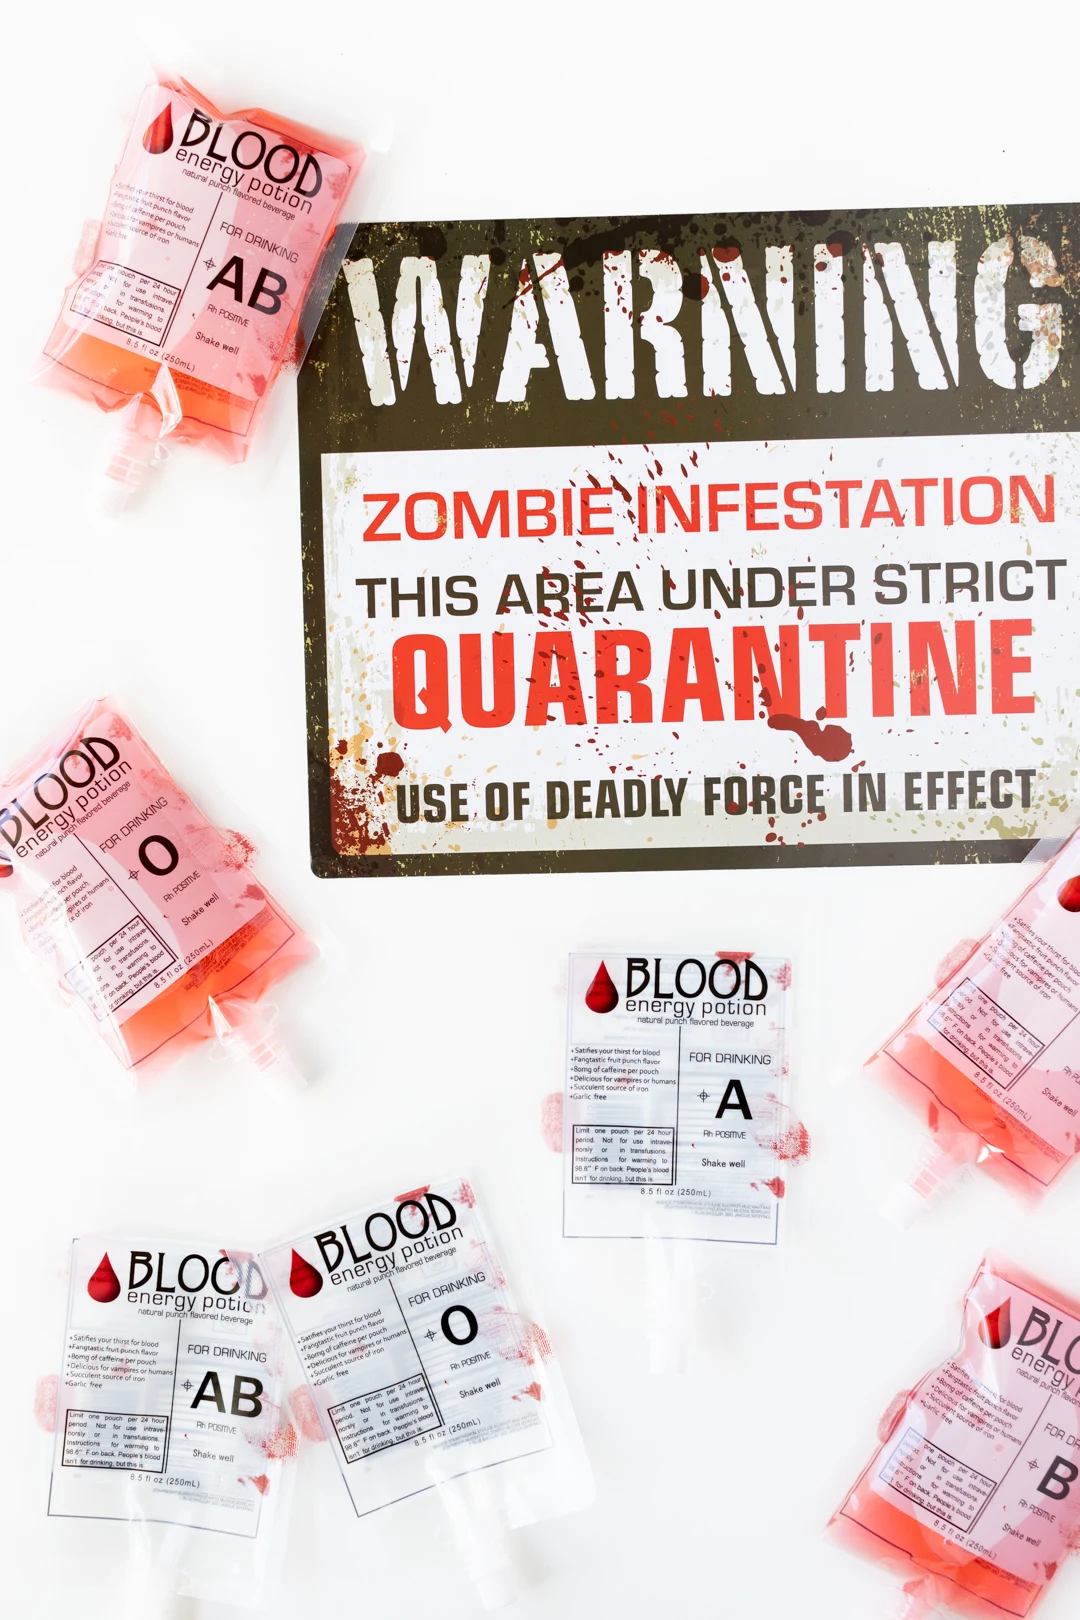 Zombie Infestation Sign with Blood Bag Drinks.